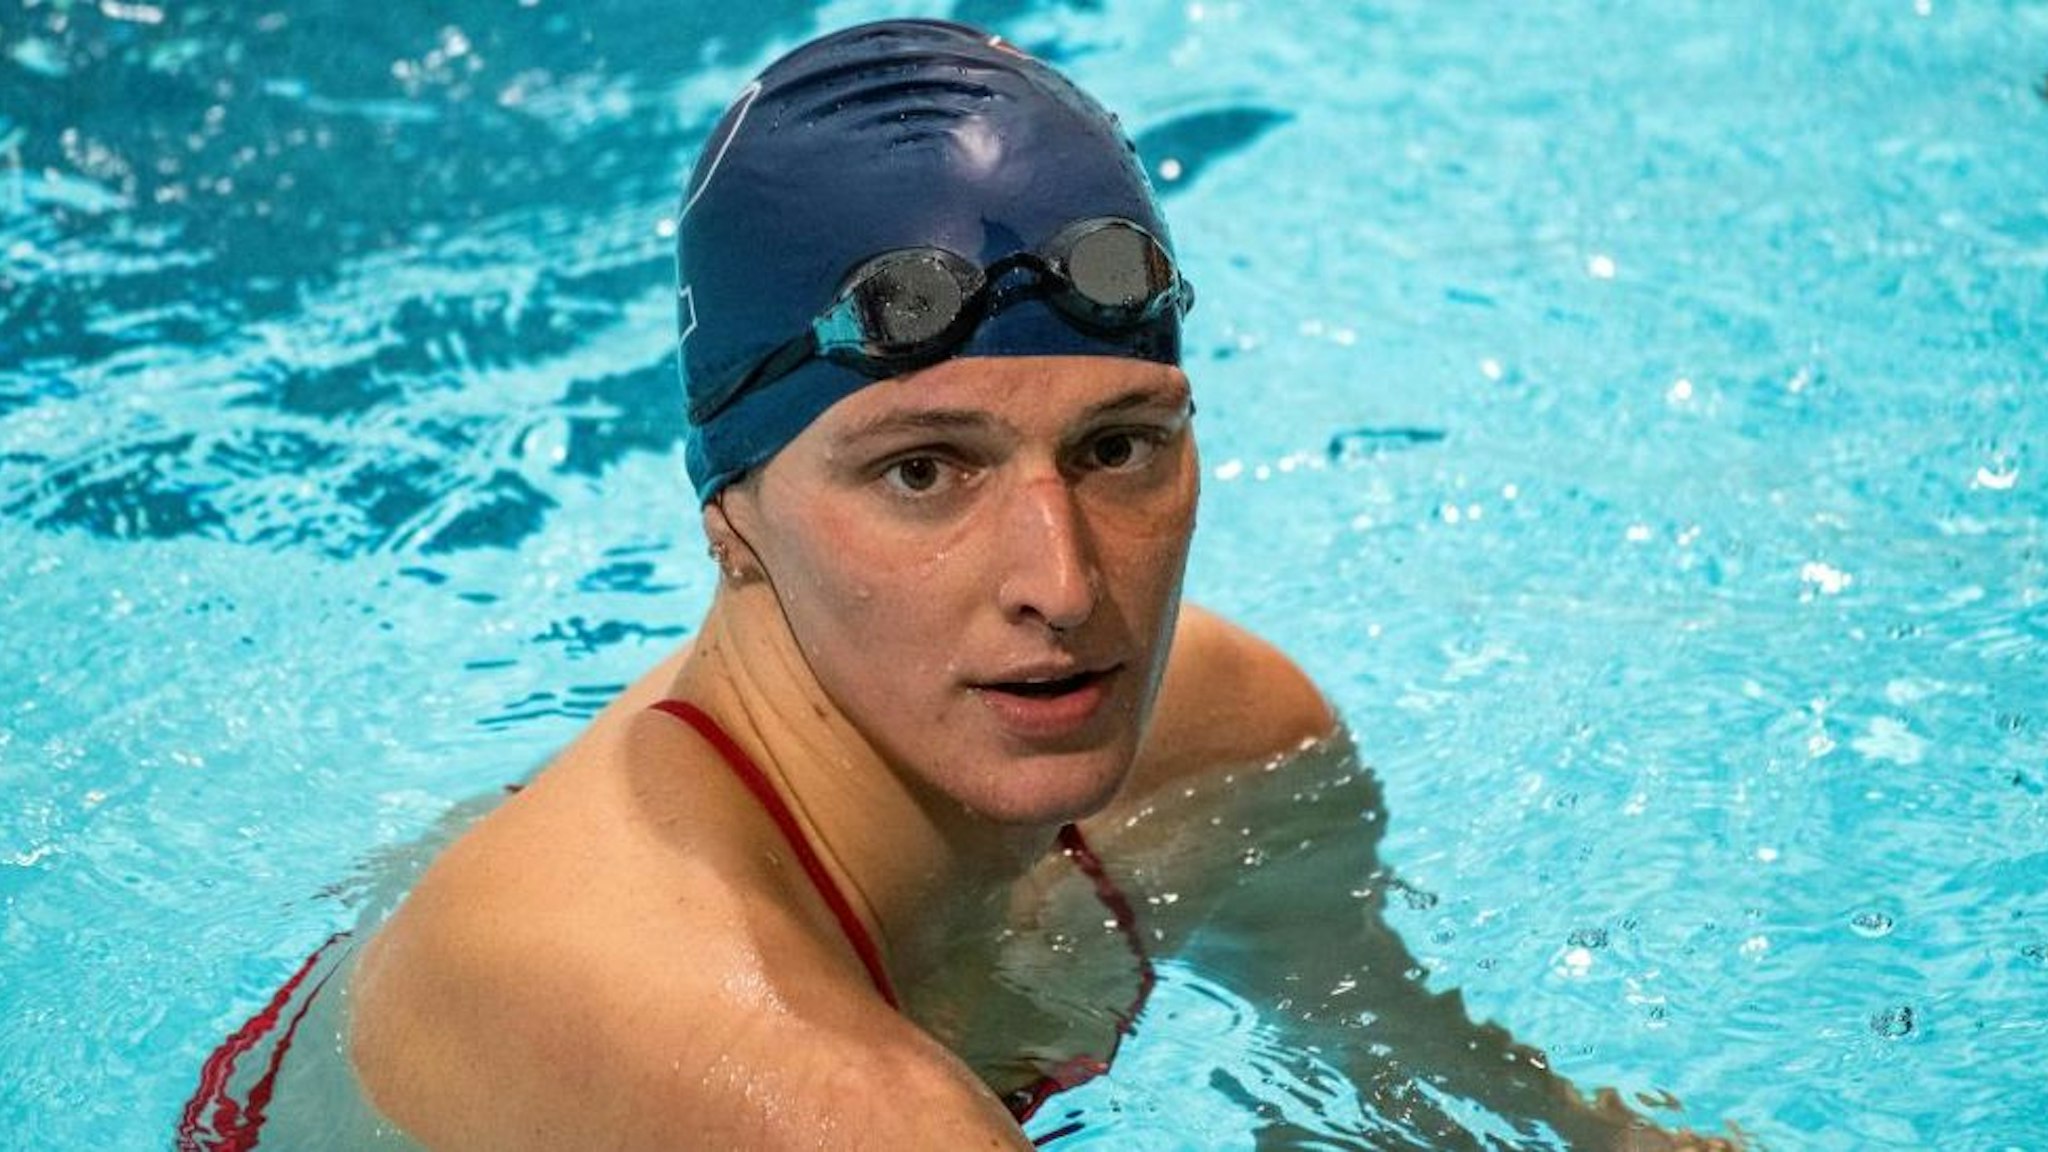 Lia Thomas, a transgender woman, finishes the 200 yard Freestyle for the University of Pennsylvania at an Ivy League swim meet against Harvard University in Cambridge, Massachusetts, on January 22, 2022.